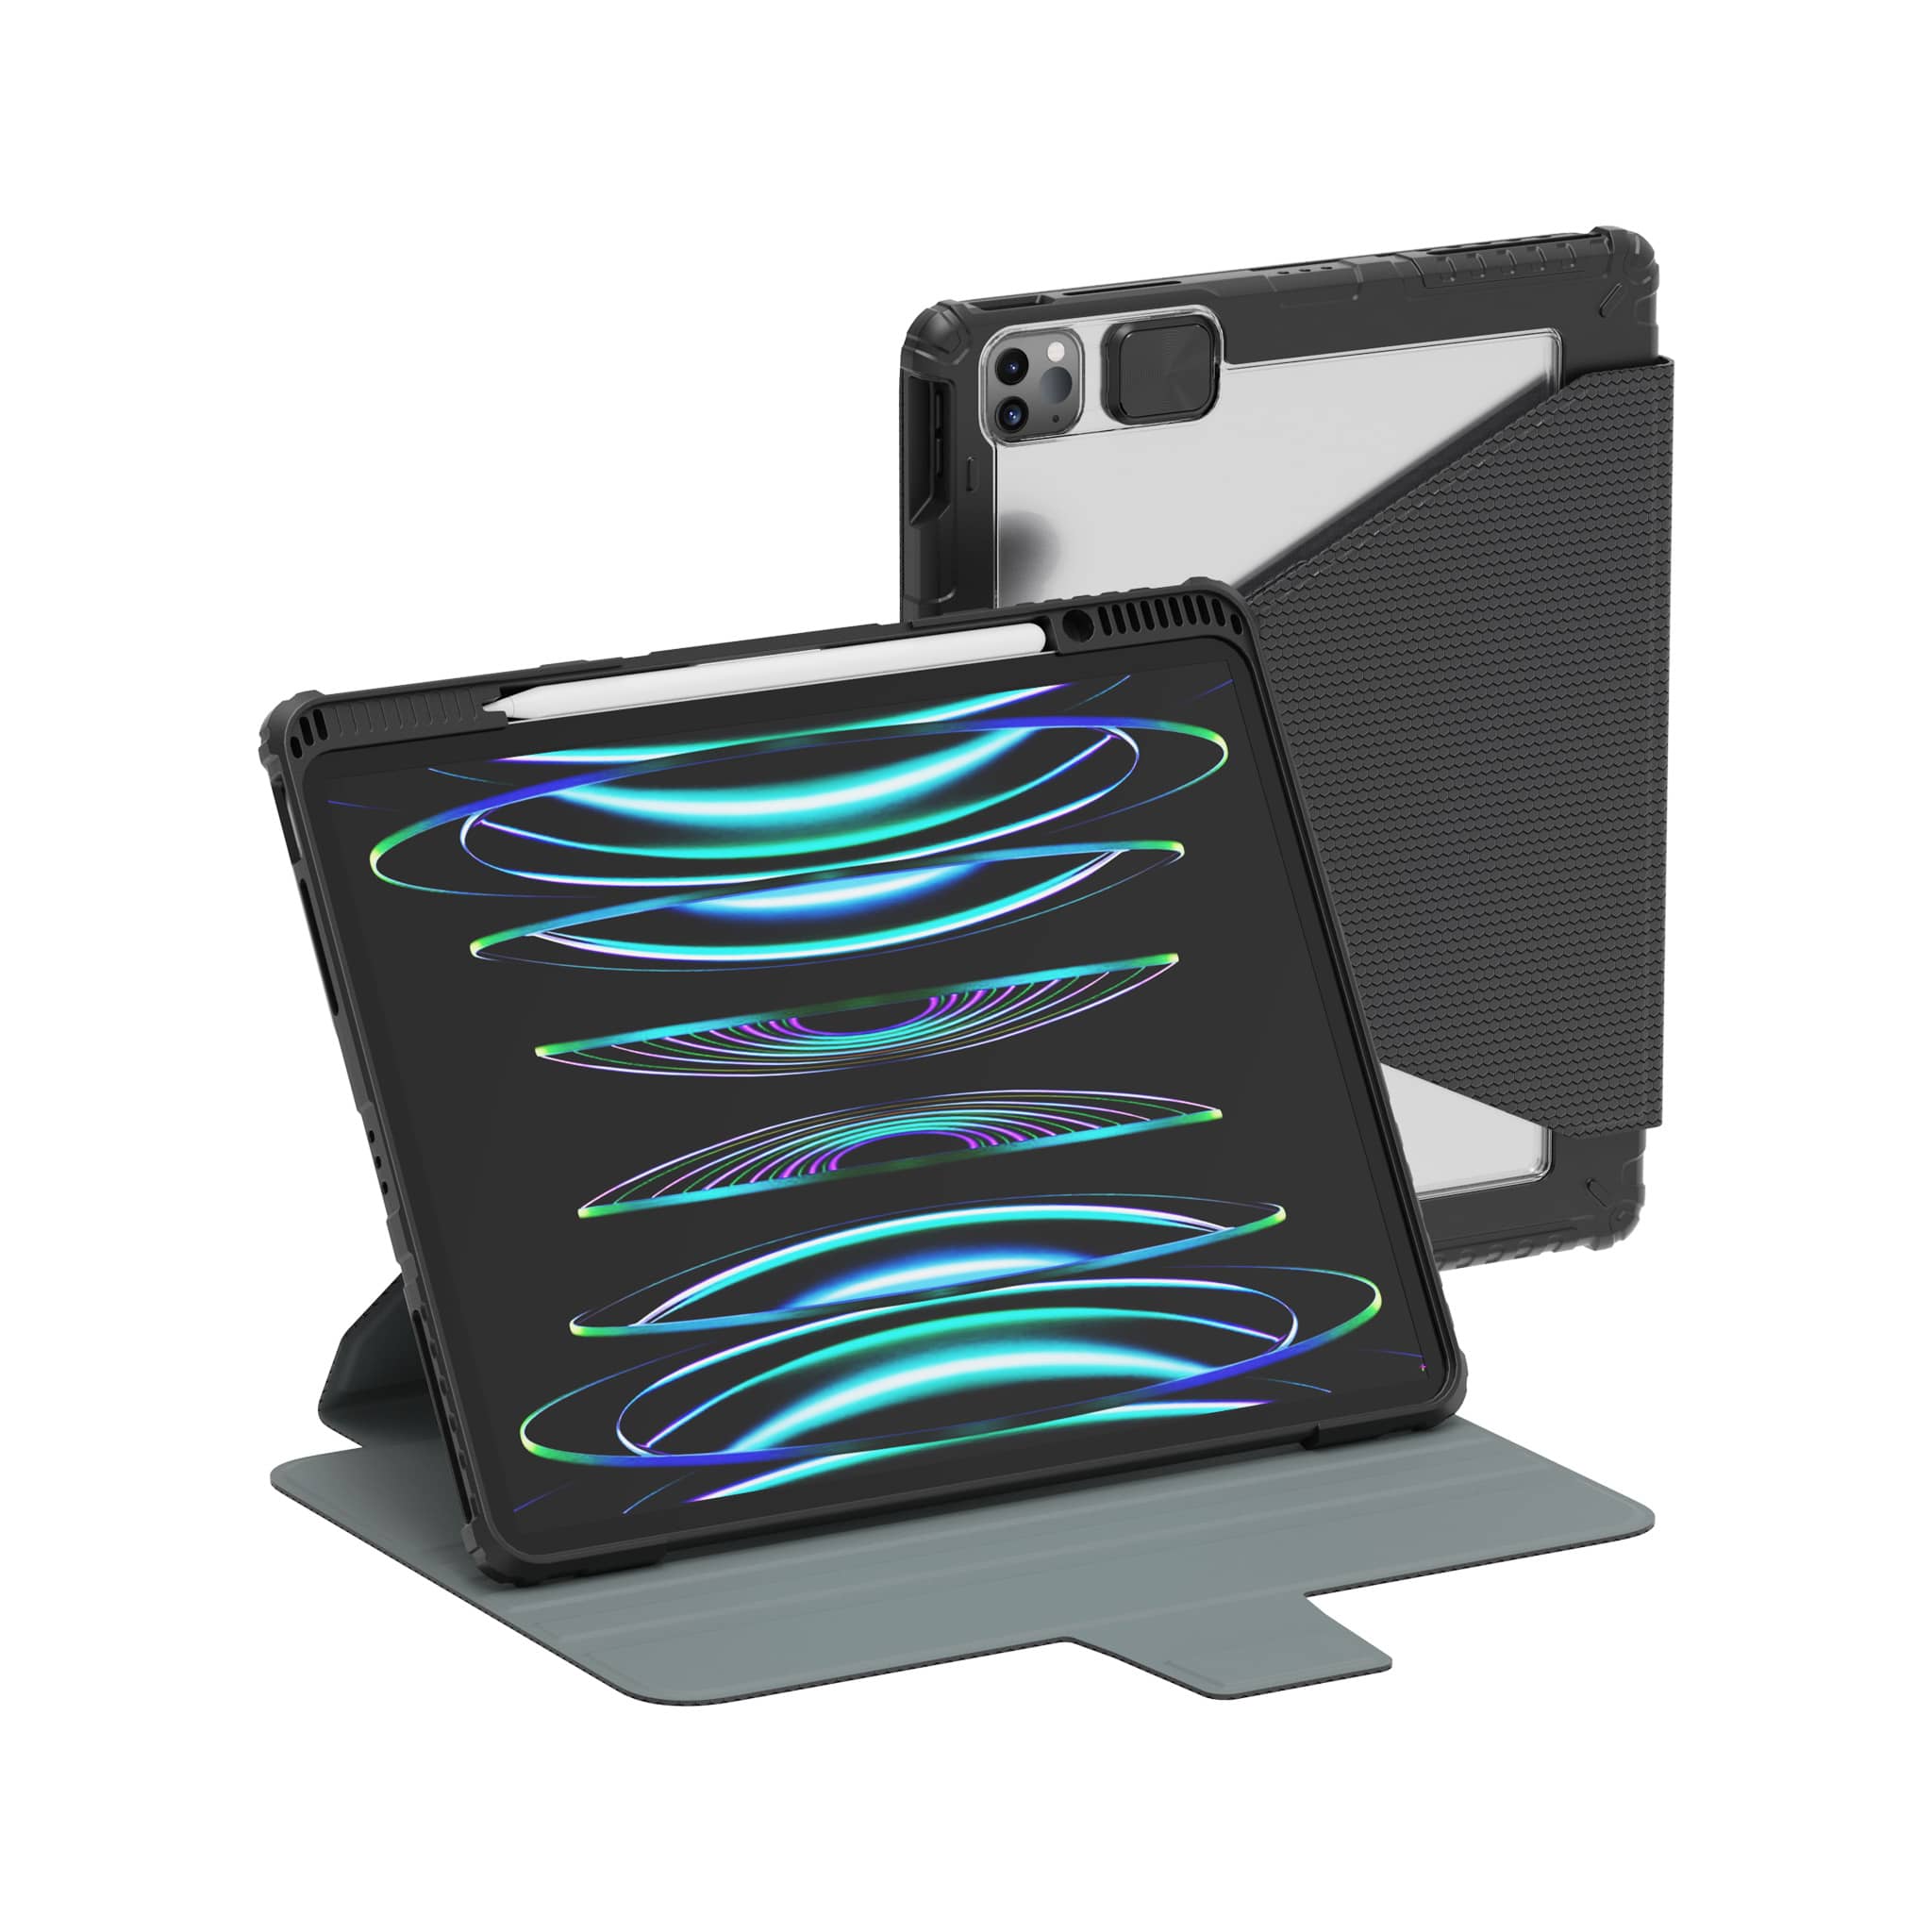 Bumper SnapSafe Case (Black) for iPad Series